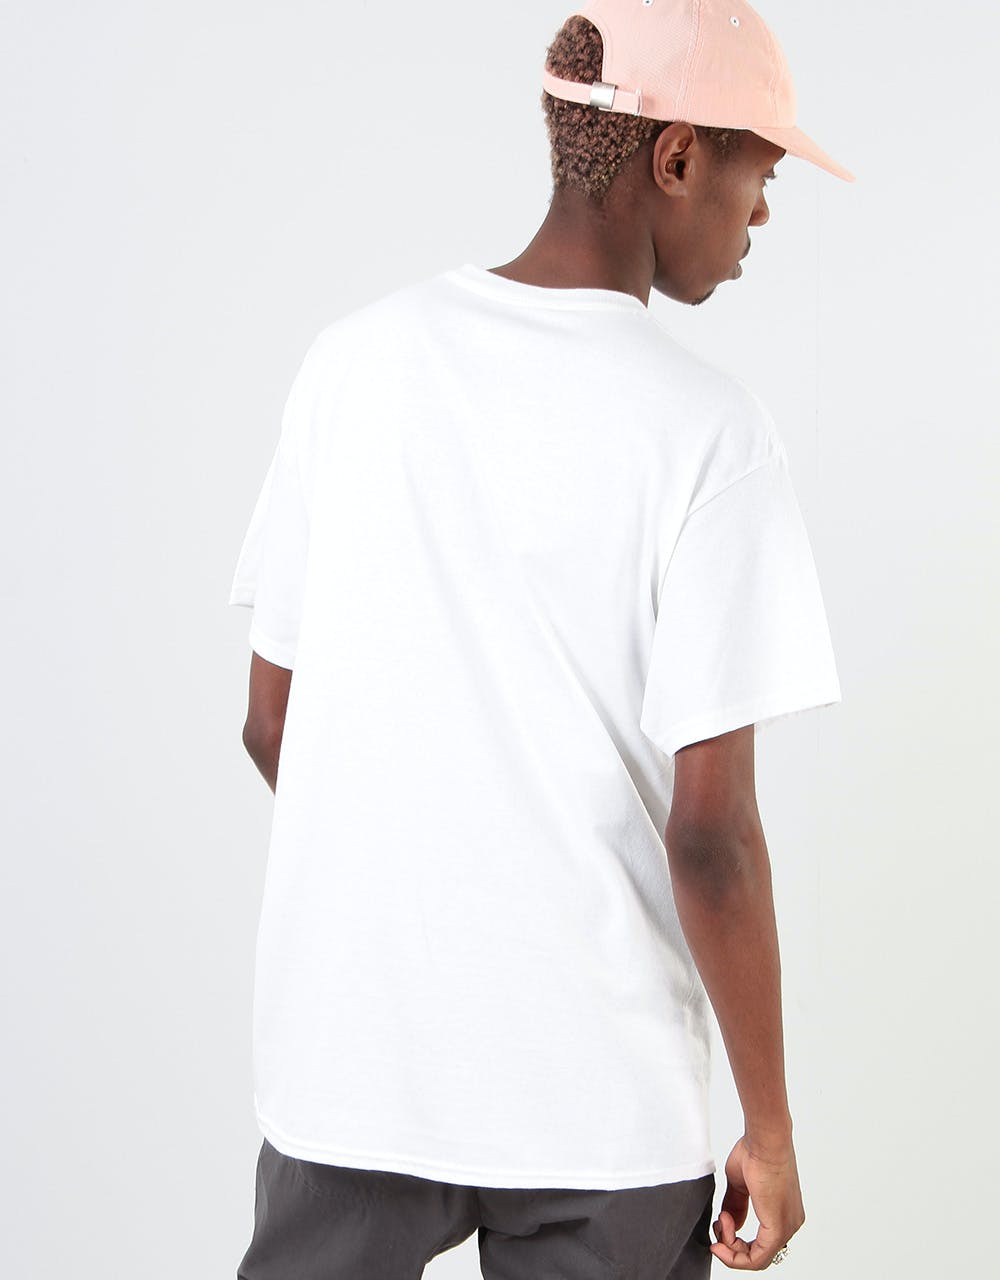 Route One Throwback T-Shirt - White